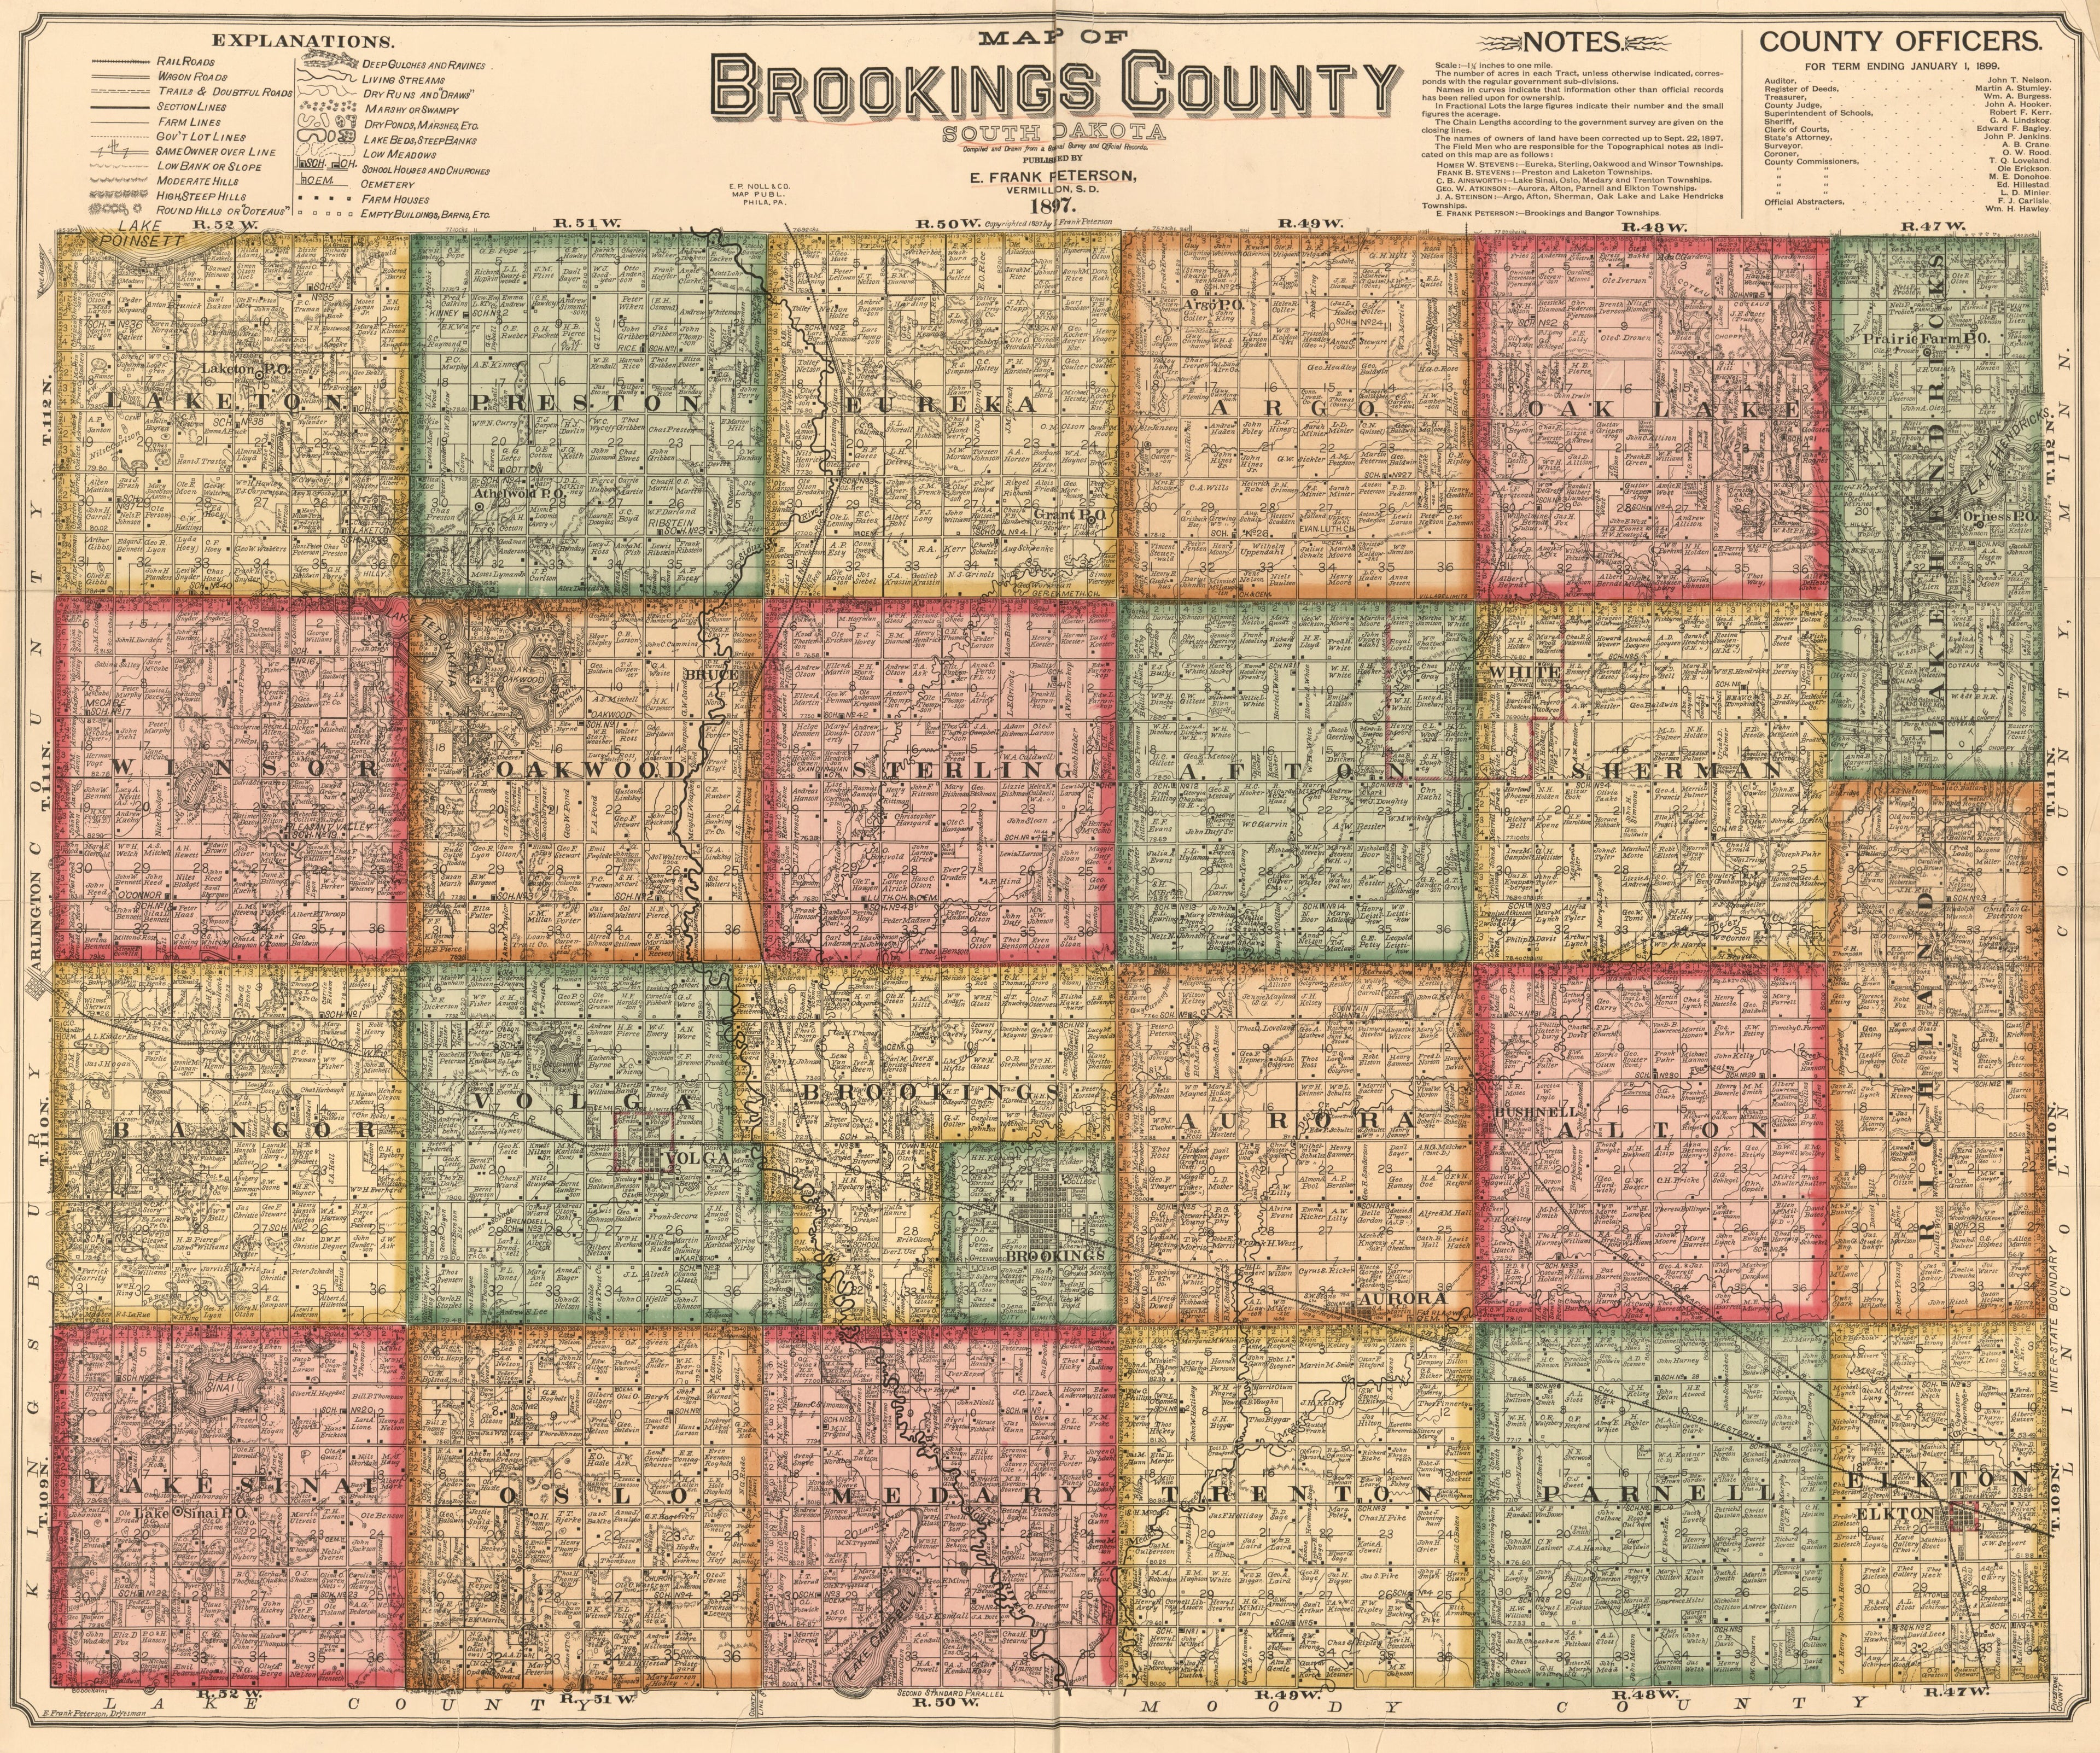 This old map of Map of Brookings County, South Dakota : Compiled and Drawn from a Special Survey and from Official Records from 1897 was created by  E.P. Noll &amp; Co, E. Frank Peterson in 1897